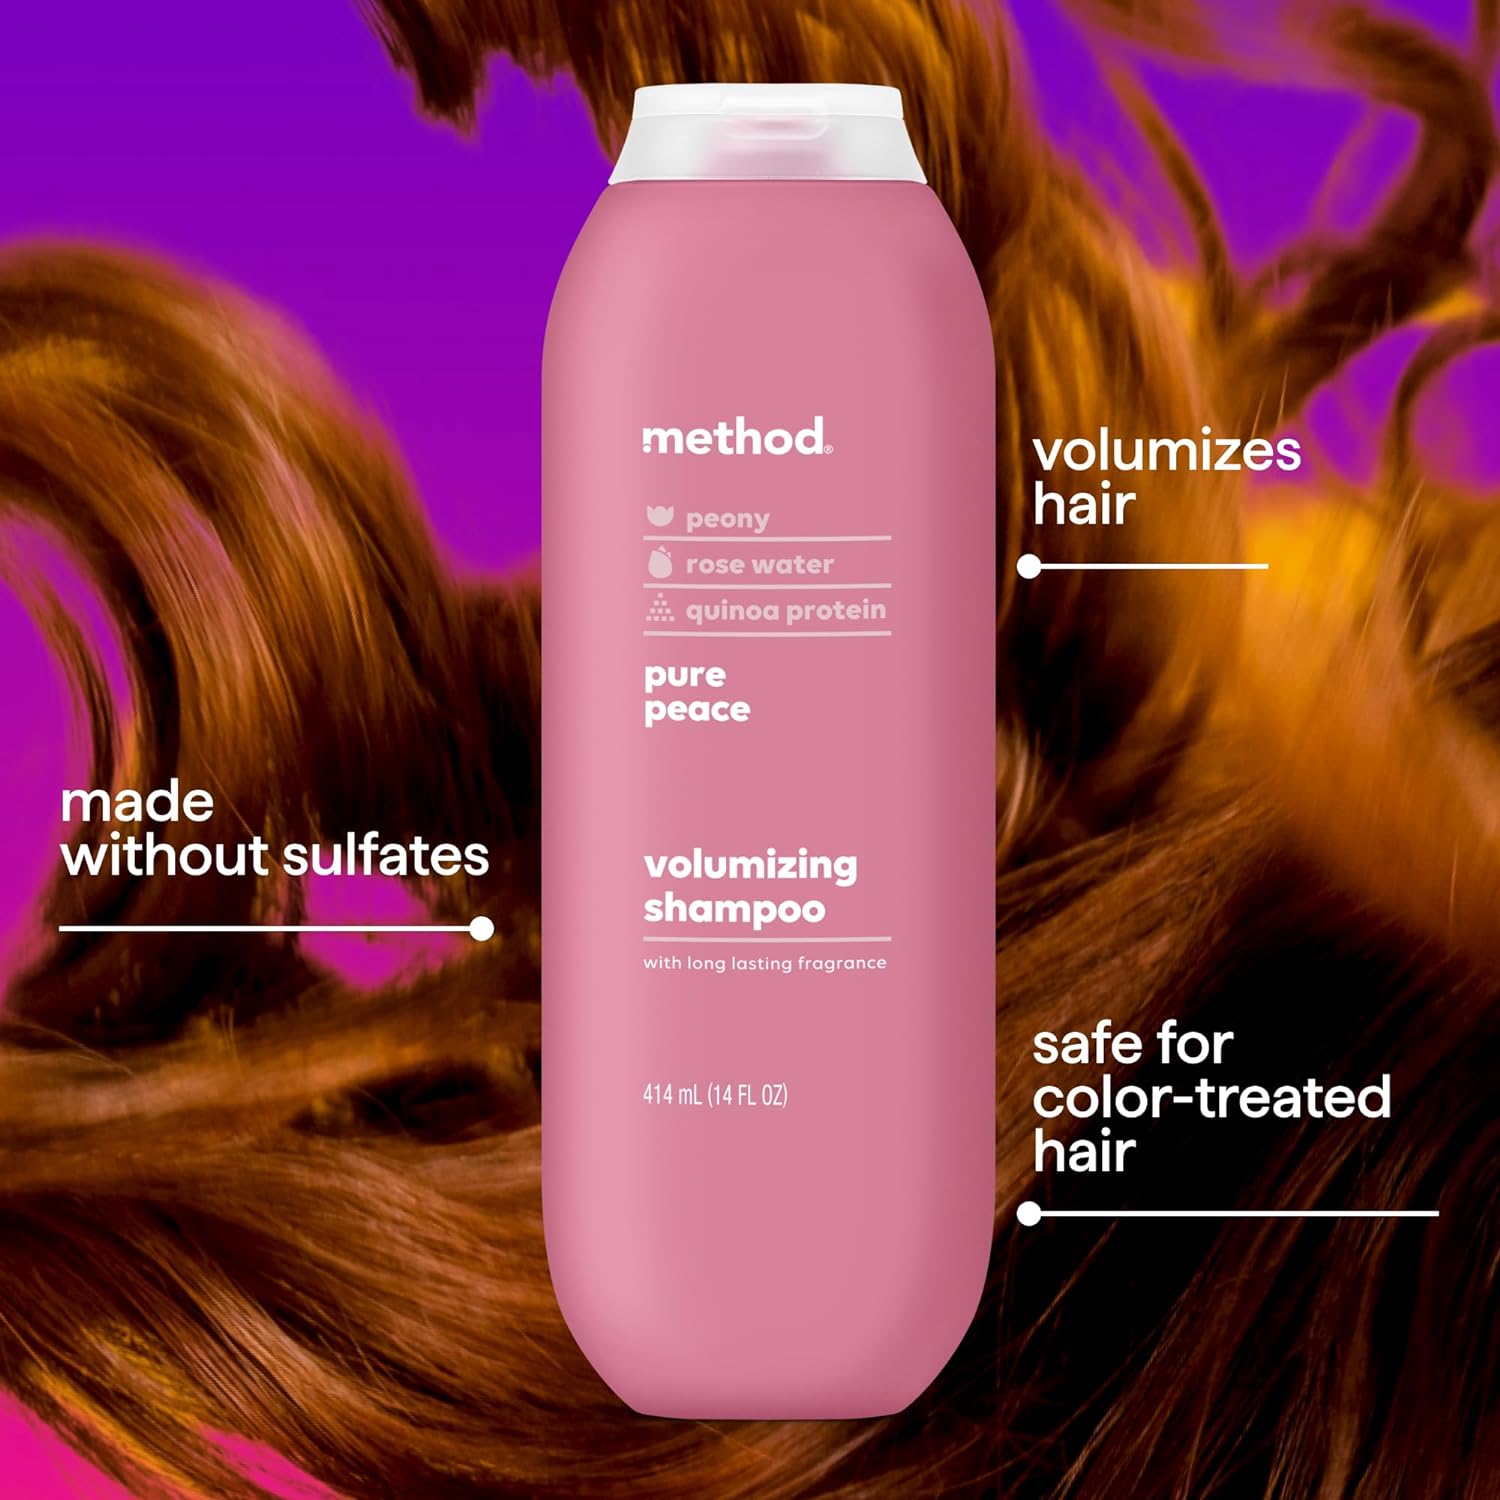 Method Volumizing Shampoo, Pure Peace with Rose, Peony, and Pink Sea Salt Scent Notes, Paraben and Sulfate Free, 14 oz (Pack of 3) : Beauty & Personal Care